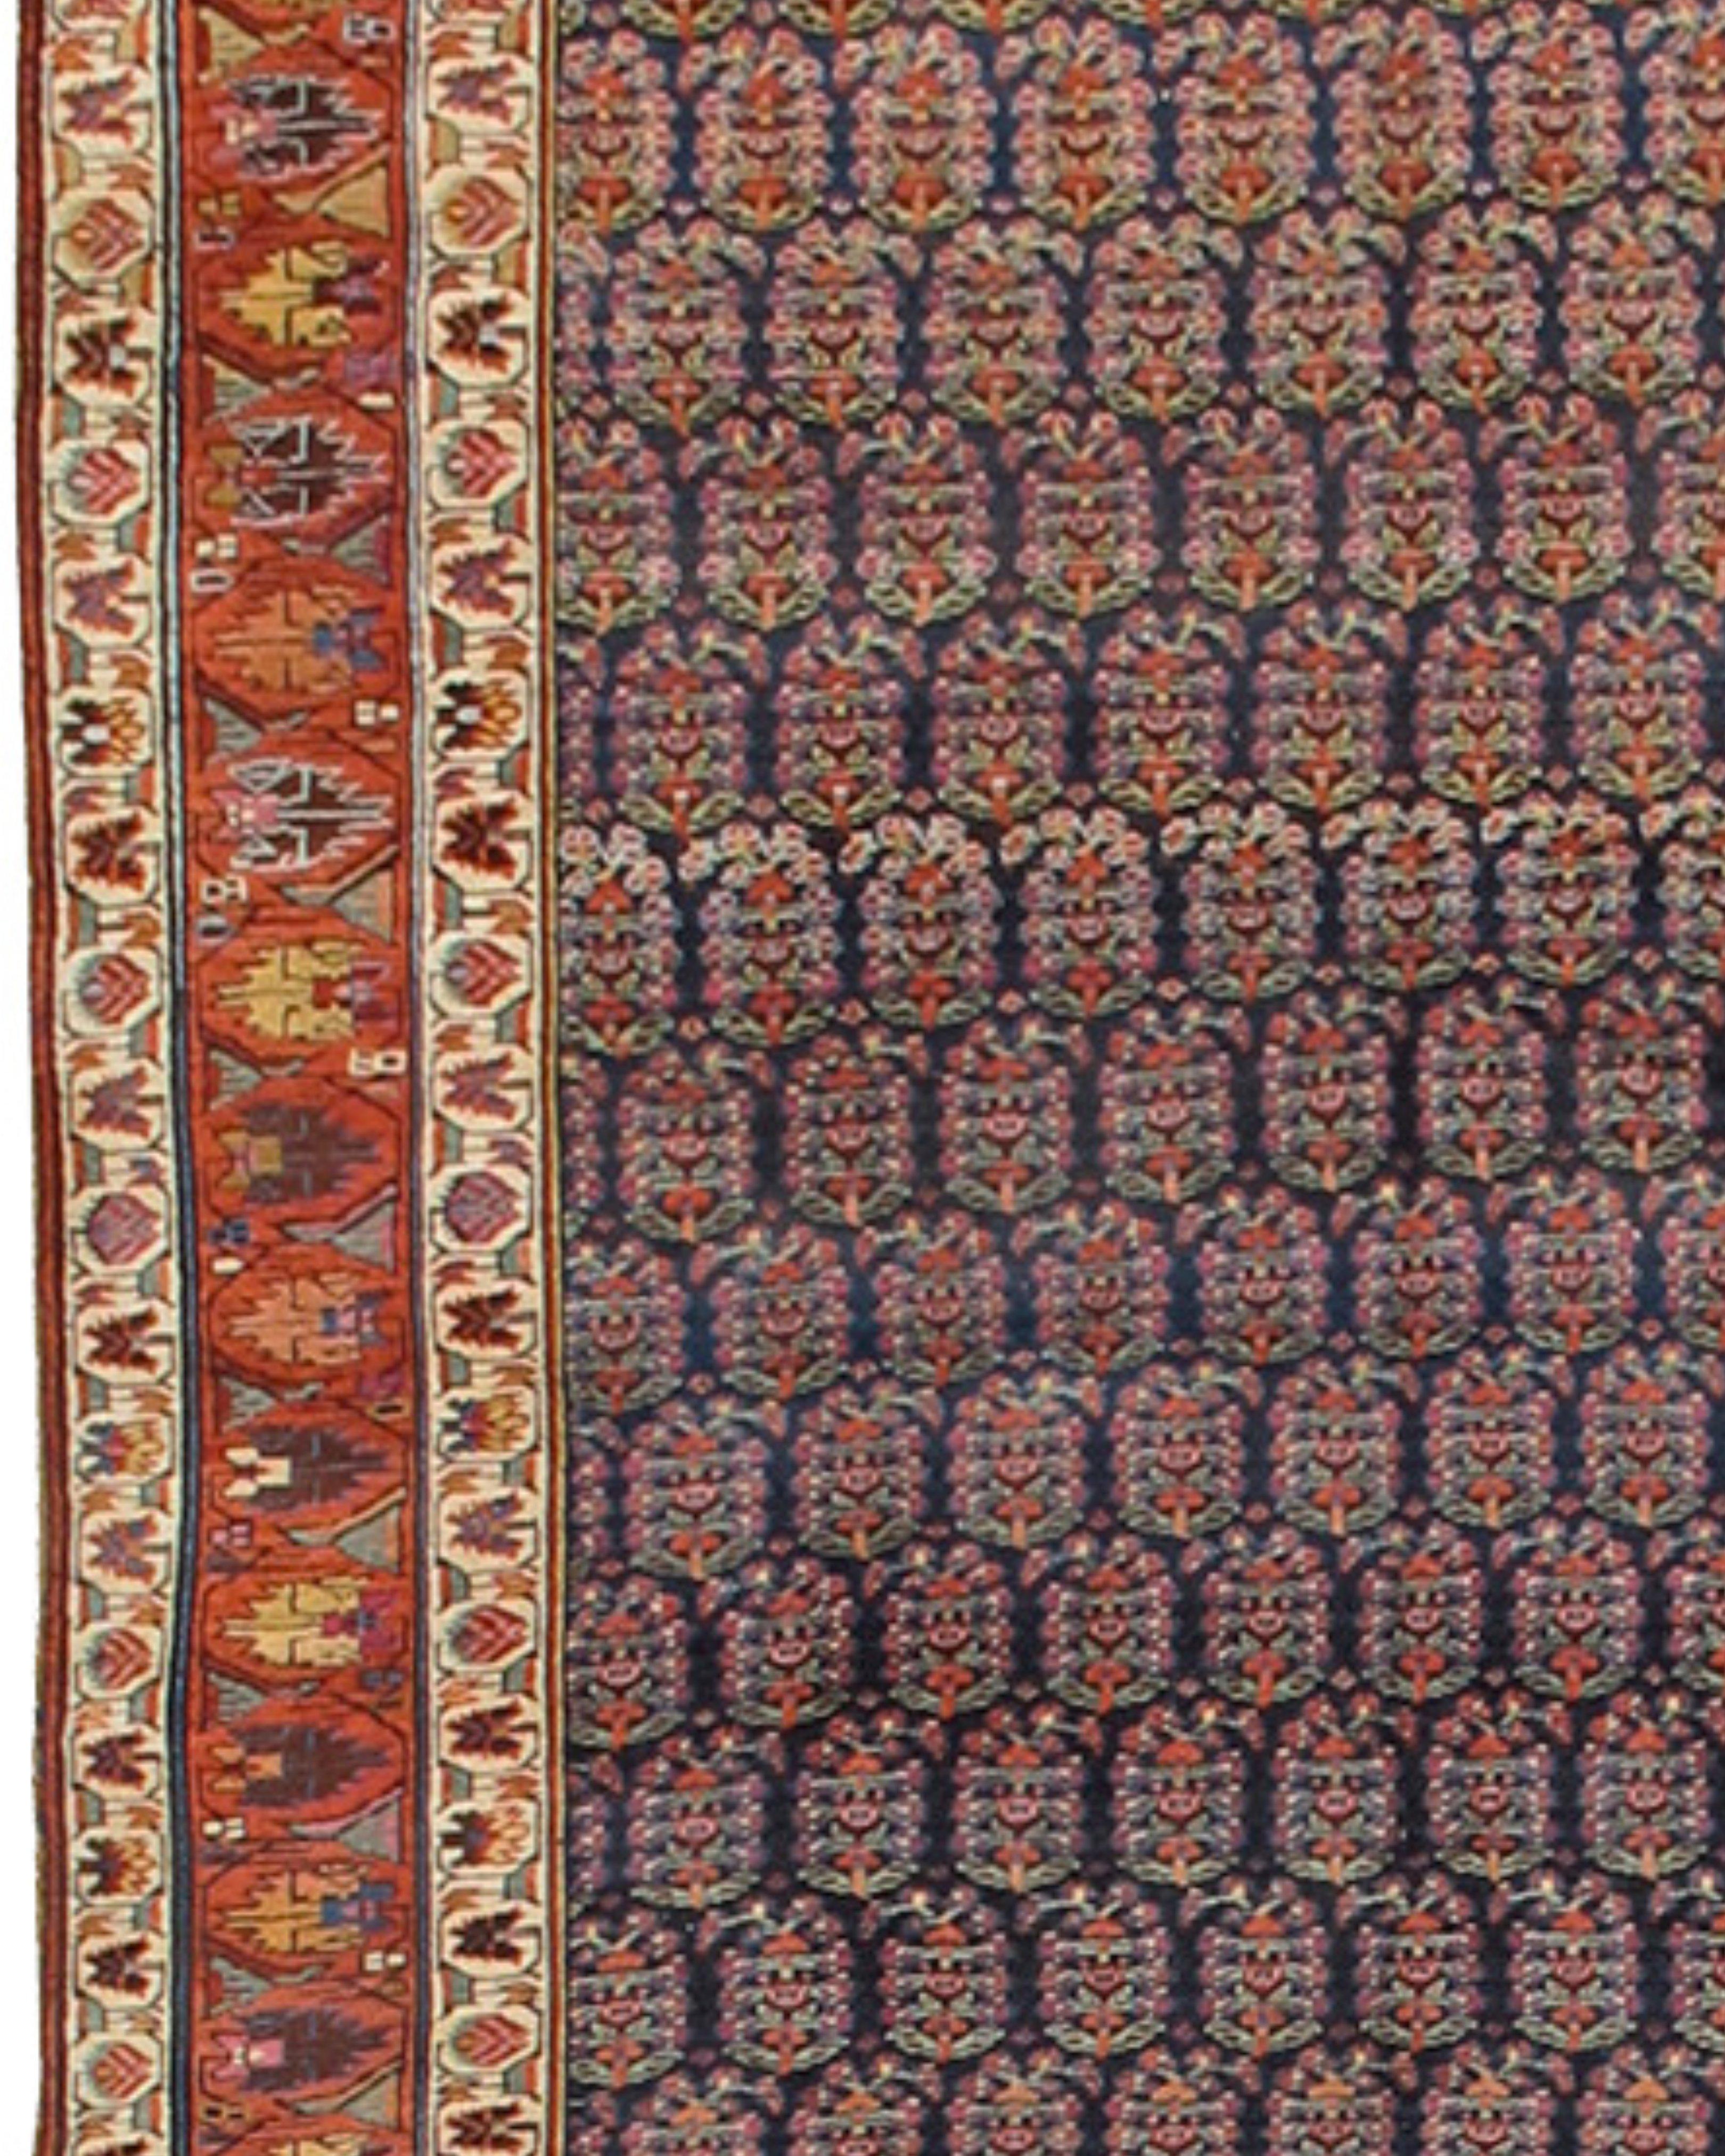 Antique Northwest Persian Long Rug, 19th Century

Woven in the Kurdish ethnic region of Northwest Persia, this magnificent corridor carpet paints rows of shimmering paisleys or boteh against a modulated blue indigo ground. Far from a static repeat